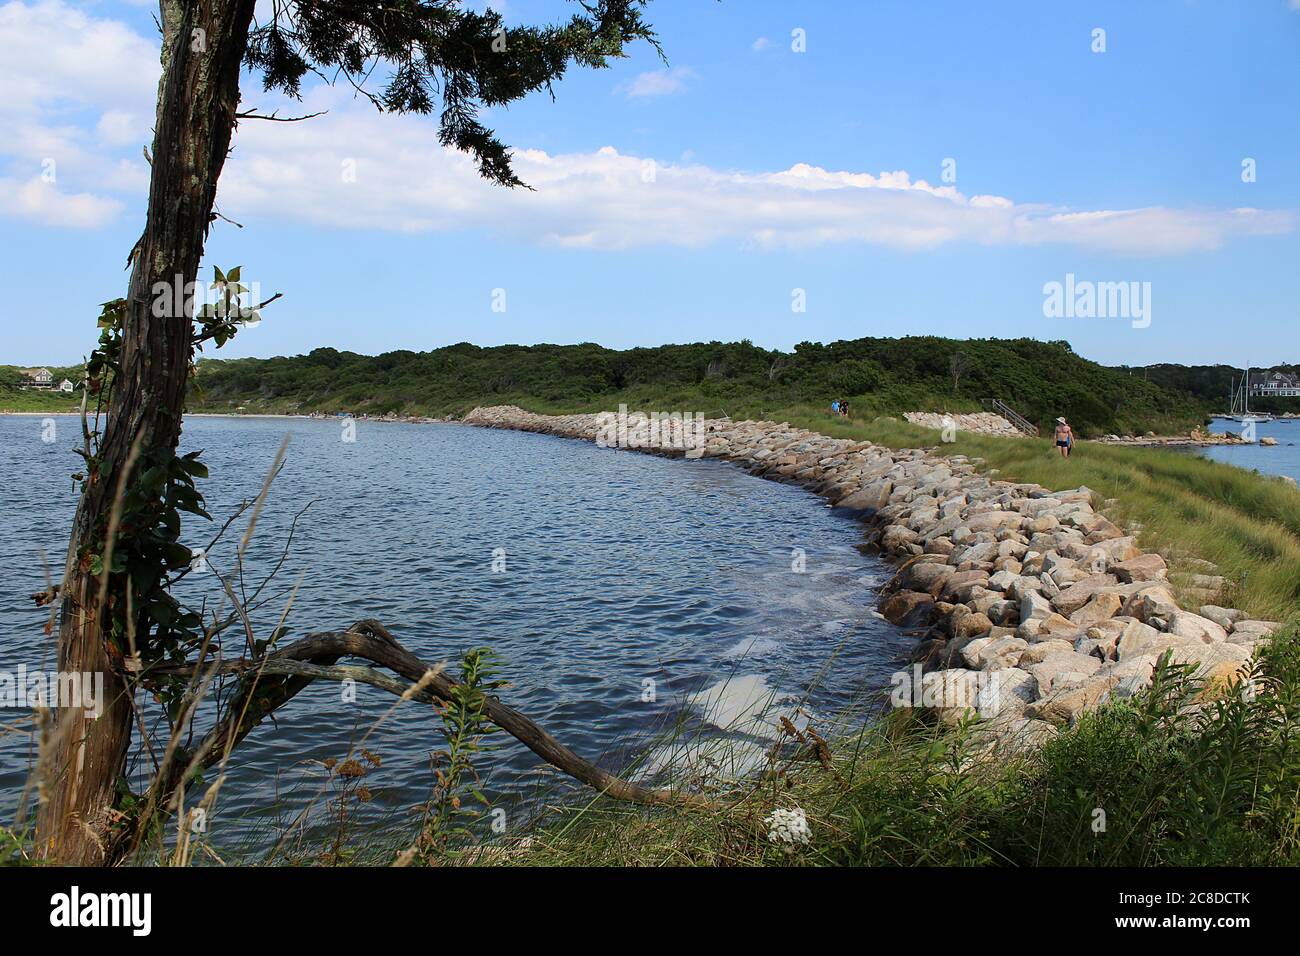 The Knob lookout at Quissett Harbor Road, Woods Hole in the Falmouth area of Cape Cod. Scenic hiking trail with beaches, wooded area and wildlife. Stock Photo